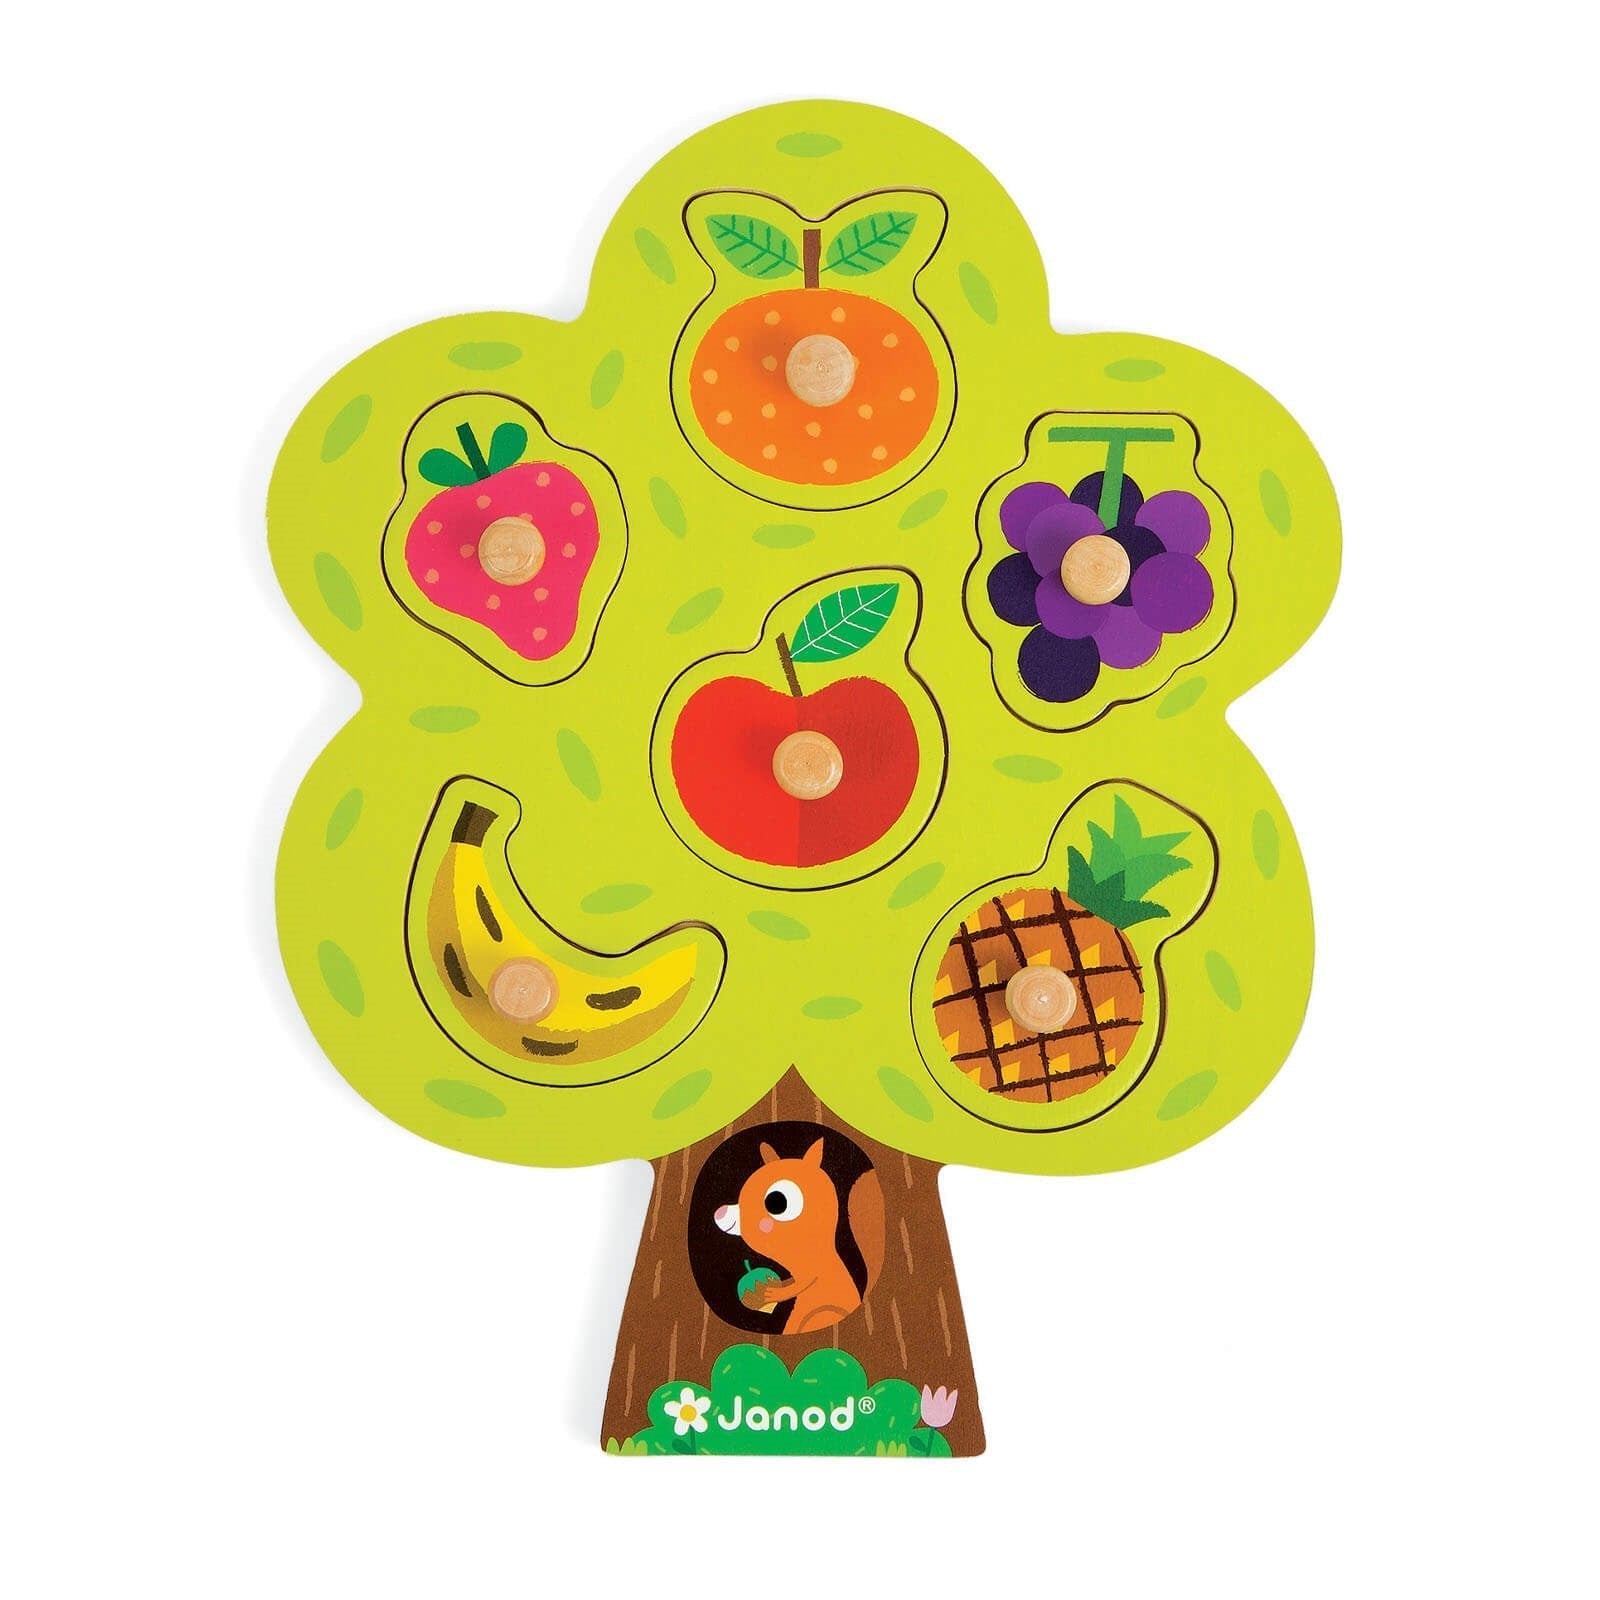 Janod Obstbaum-Puzzle